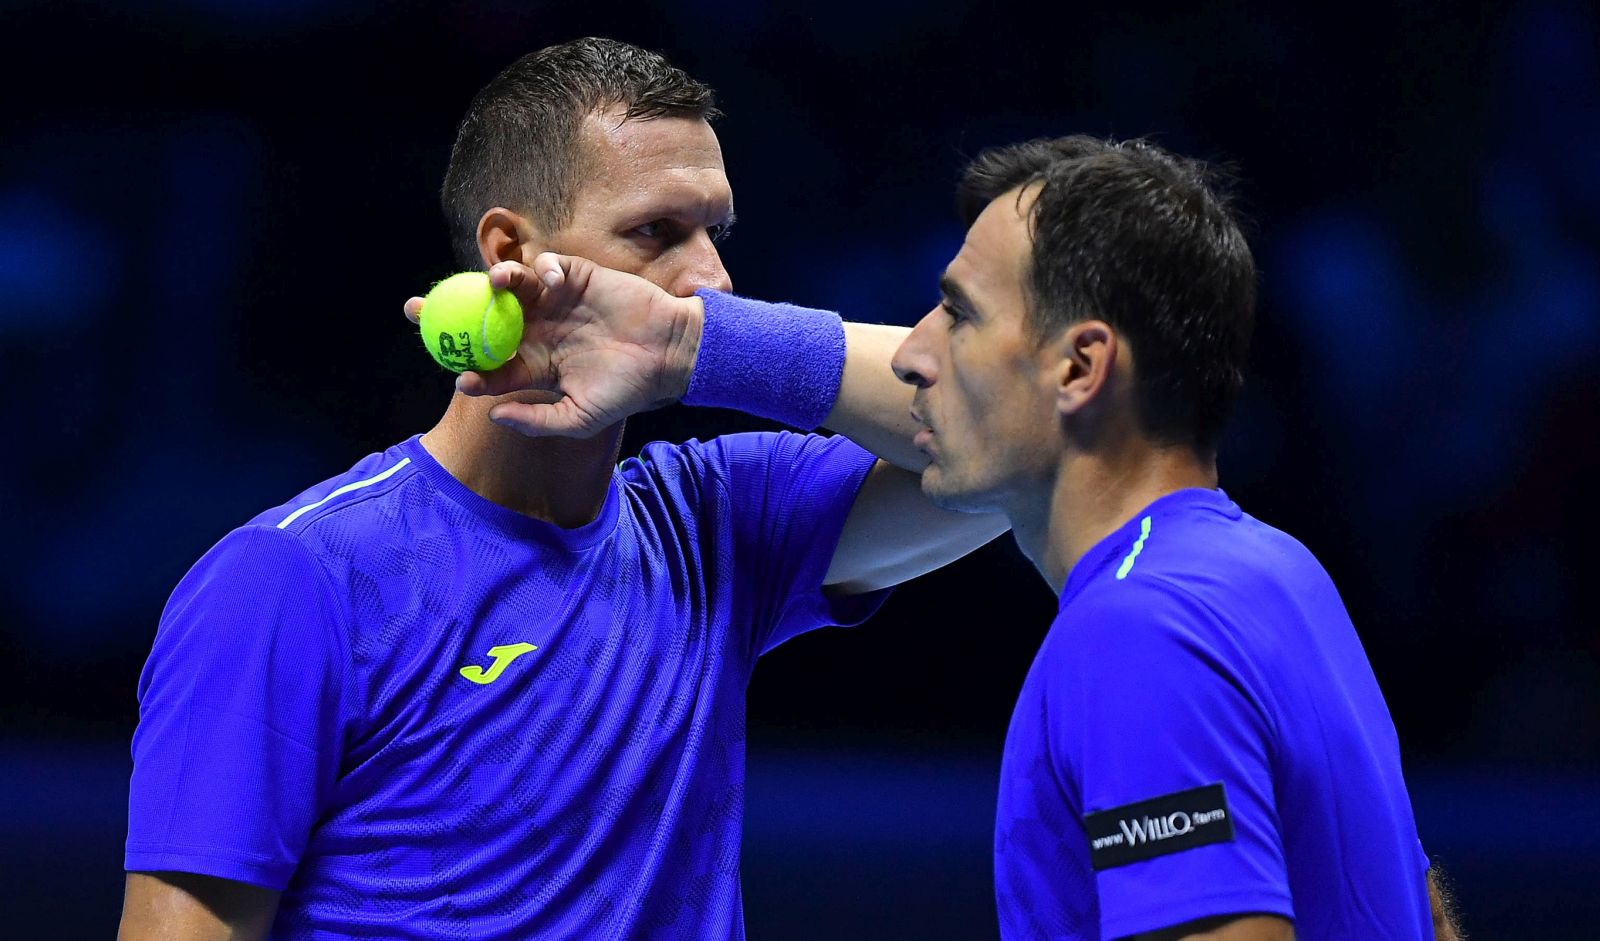 epa09582347 Ivan Dodig of Croatia and Filip Polasek of Slovakia (L) react during the doubles match against Horacio Zeballos of Argentina (R) and Marcel Granollers of Spain at the Nitto ATP Finals in Turin, Italy, 14 November 2021.  EPA/ALESSANDRO DI MARCO